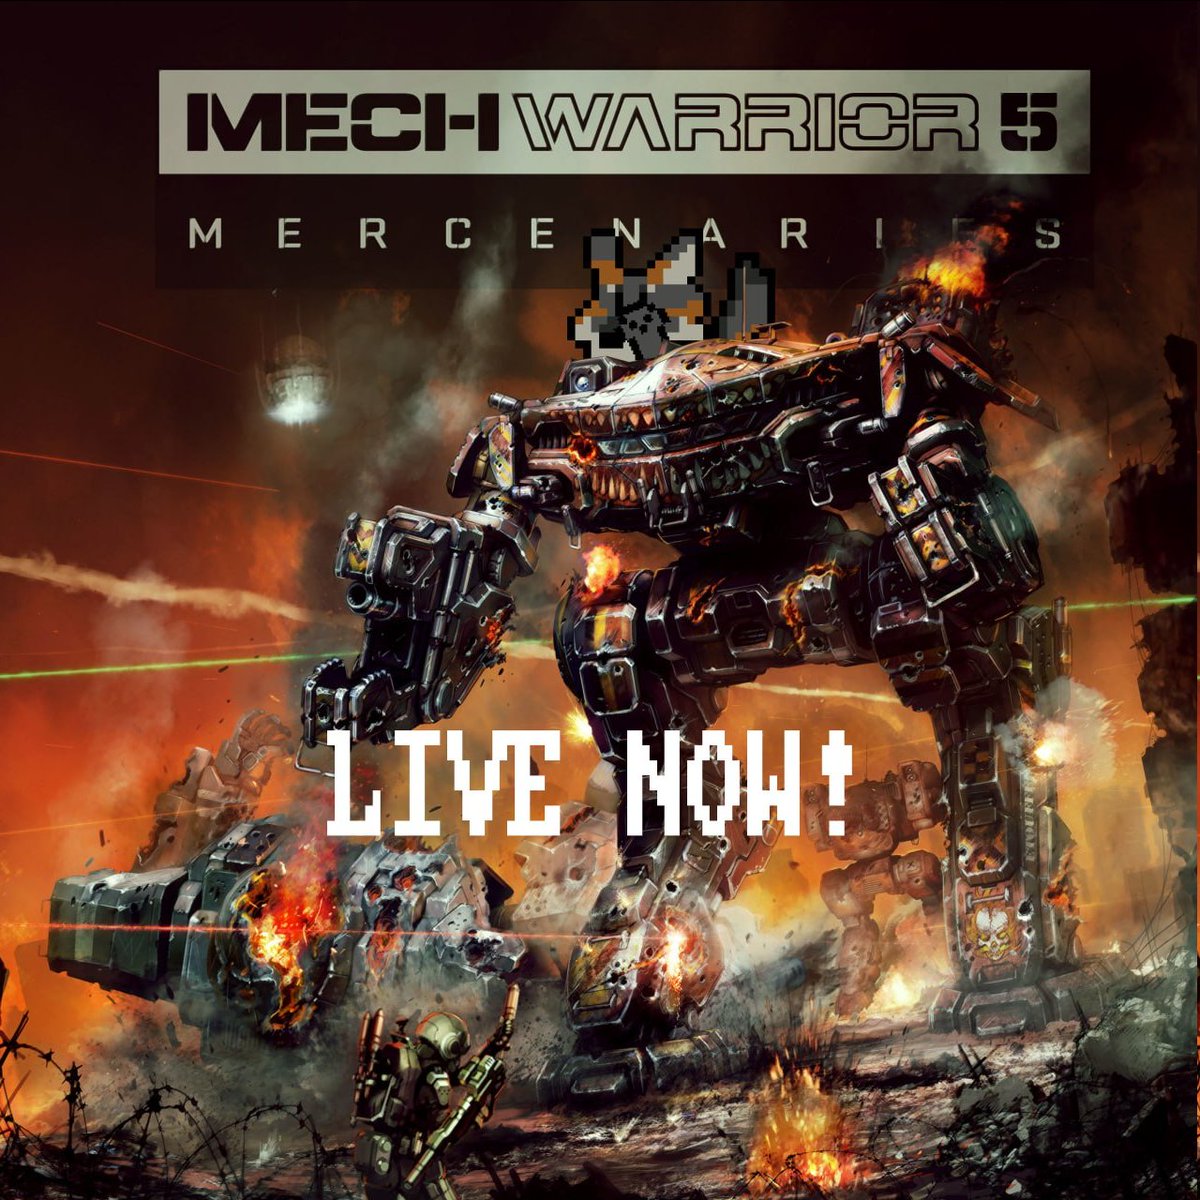 Live now for even more Mechwarrior 5!

Continuing on with the co-op career once again, we're firmly in the end-game for mech line-ups but still a lot of content to play!

Come hang out: twitch.tv/ripper253